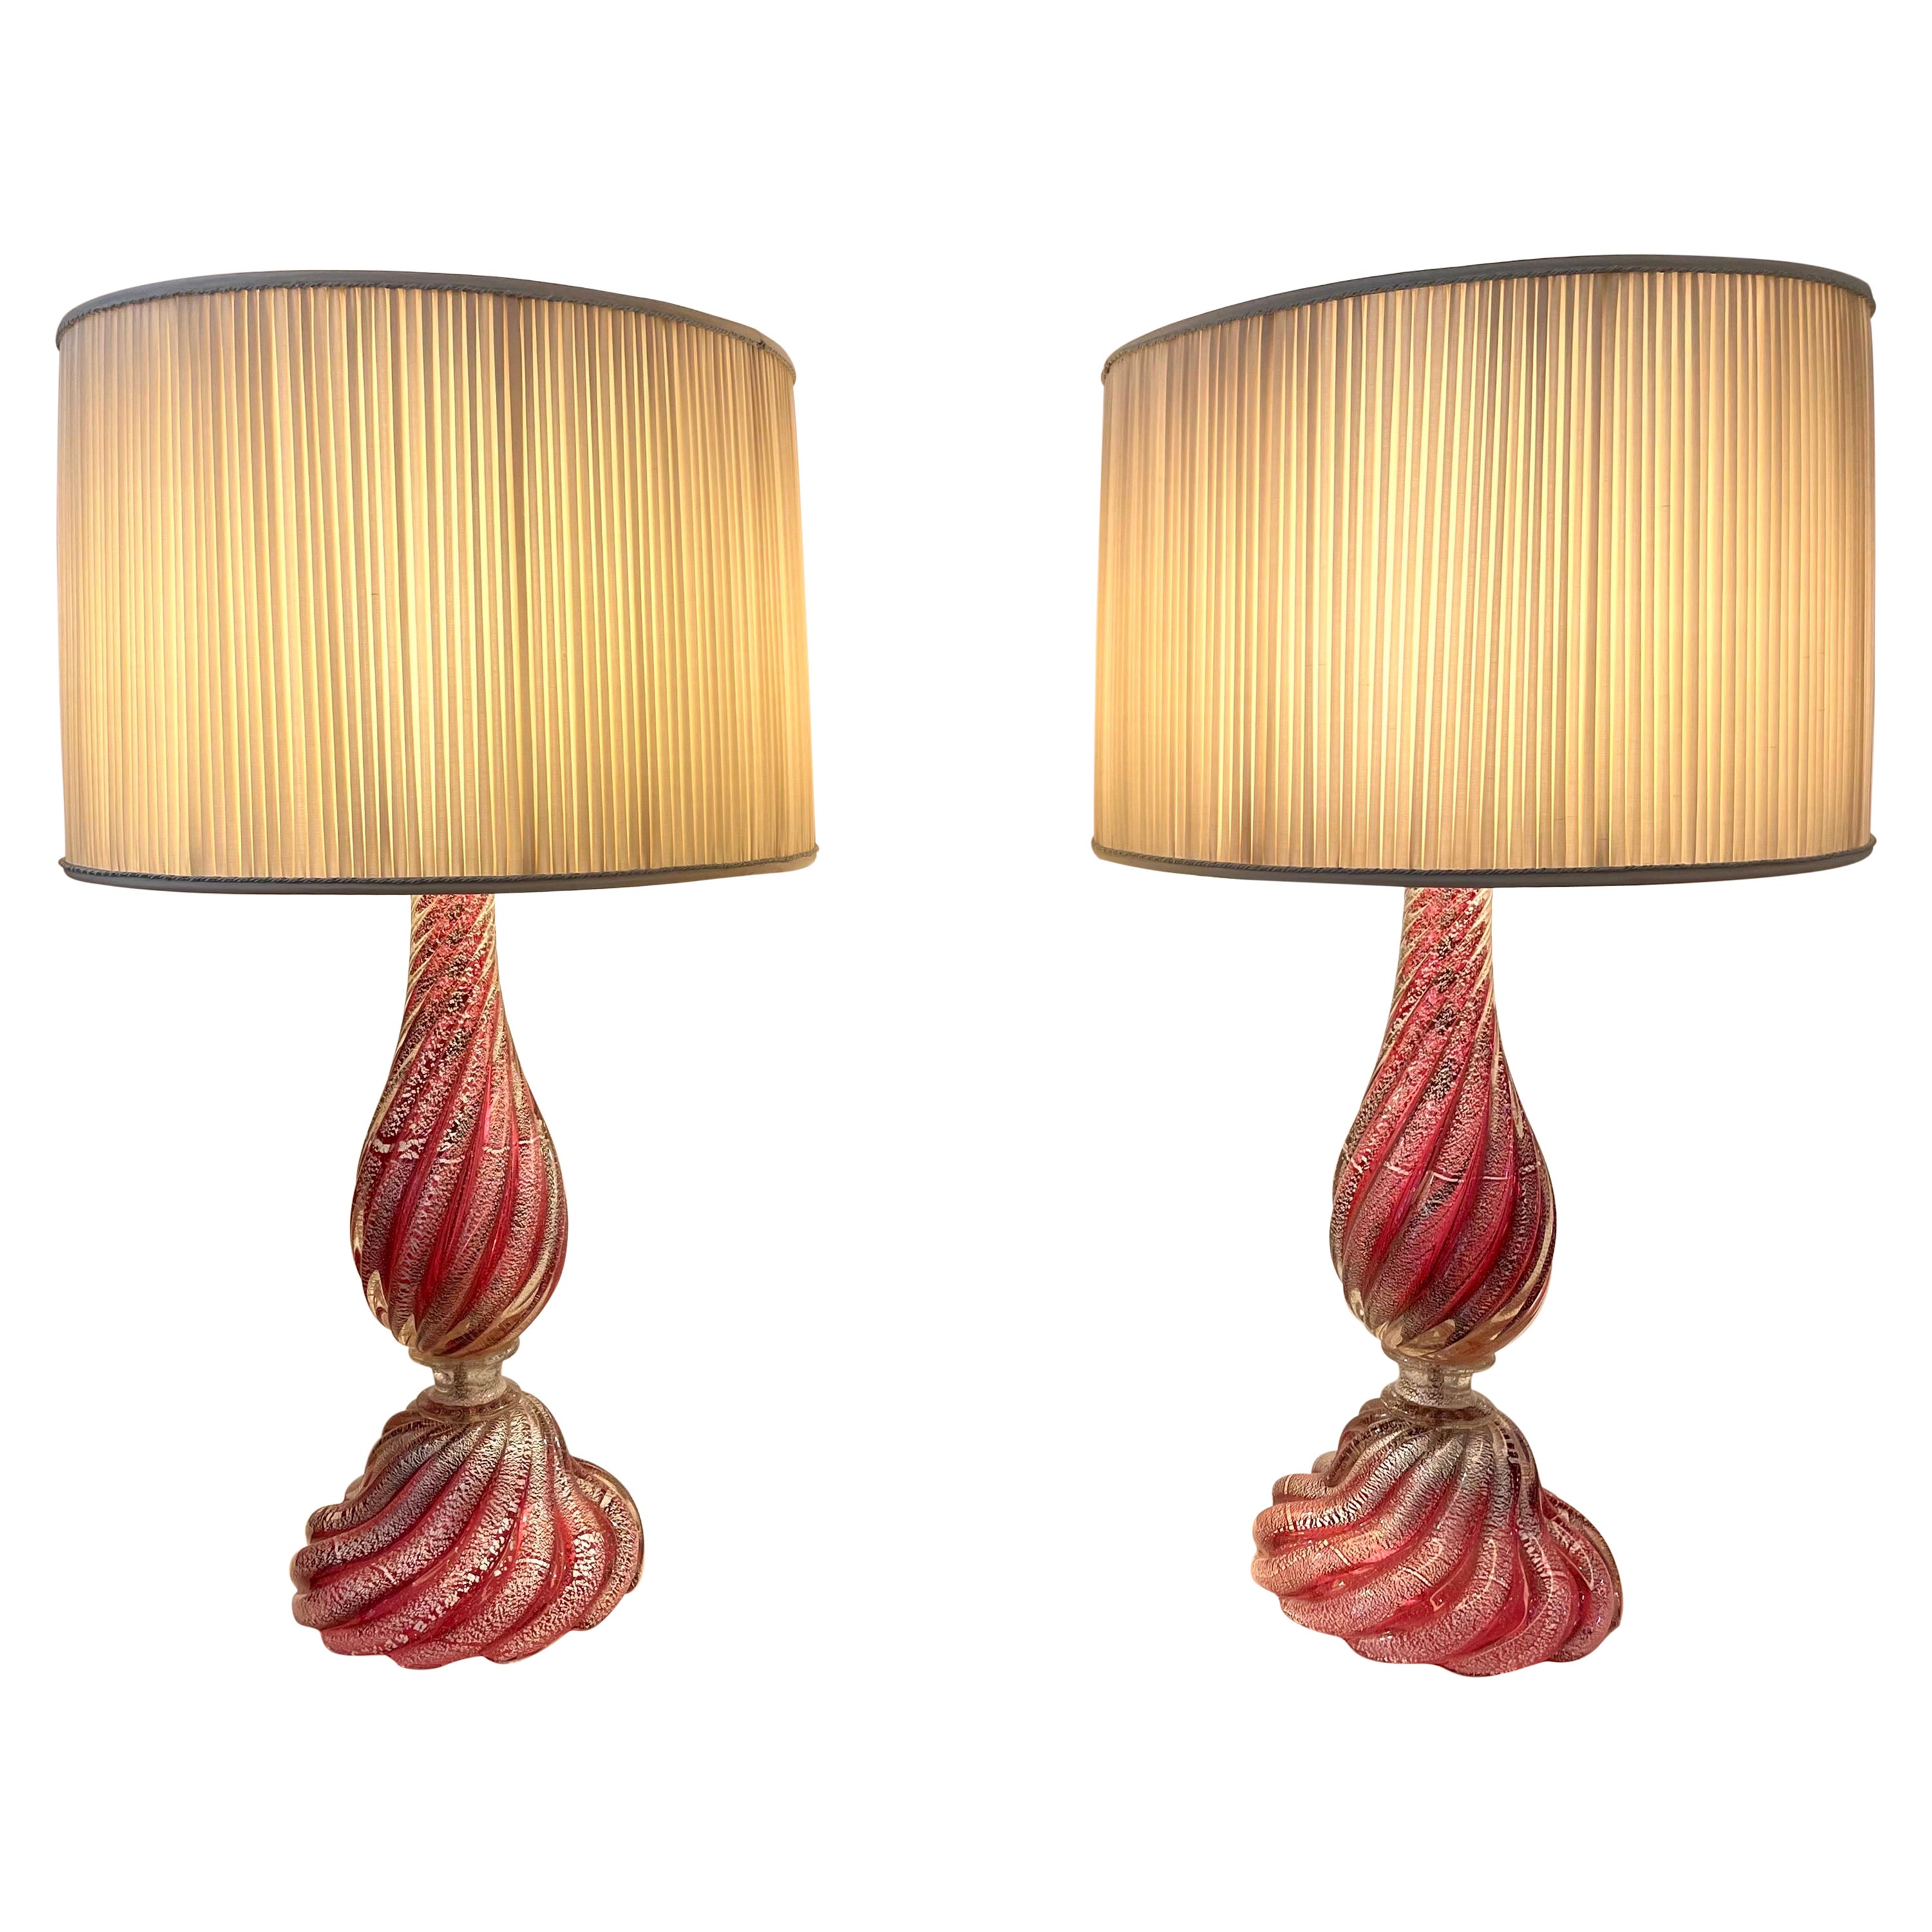 Oversized Raspberry Murano Glass Lamps W/ Silver Foil Inclusions by Barovier For Sale